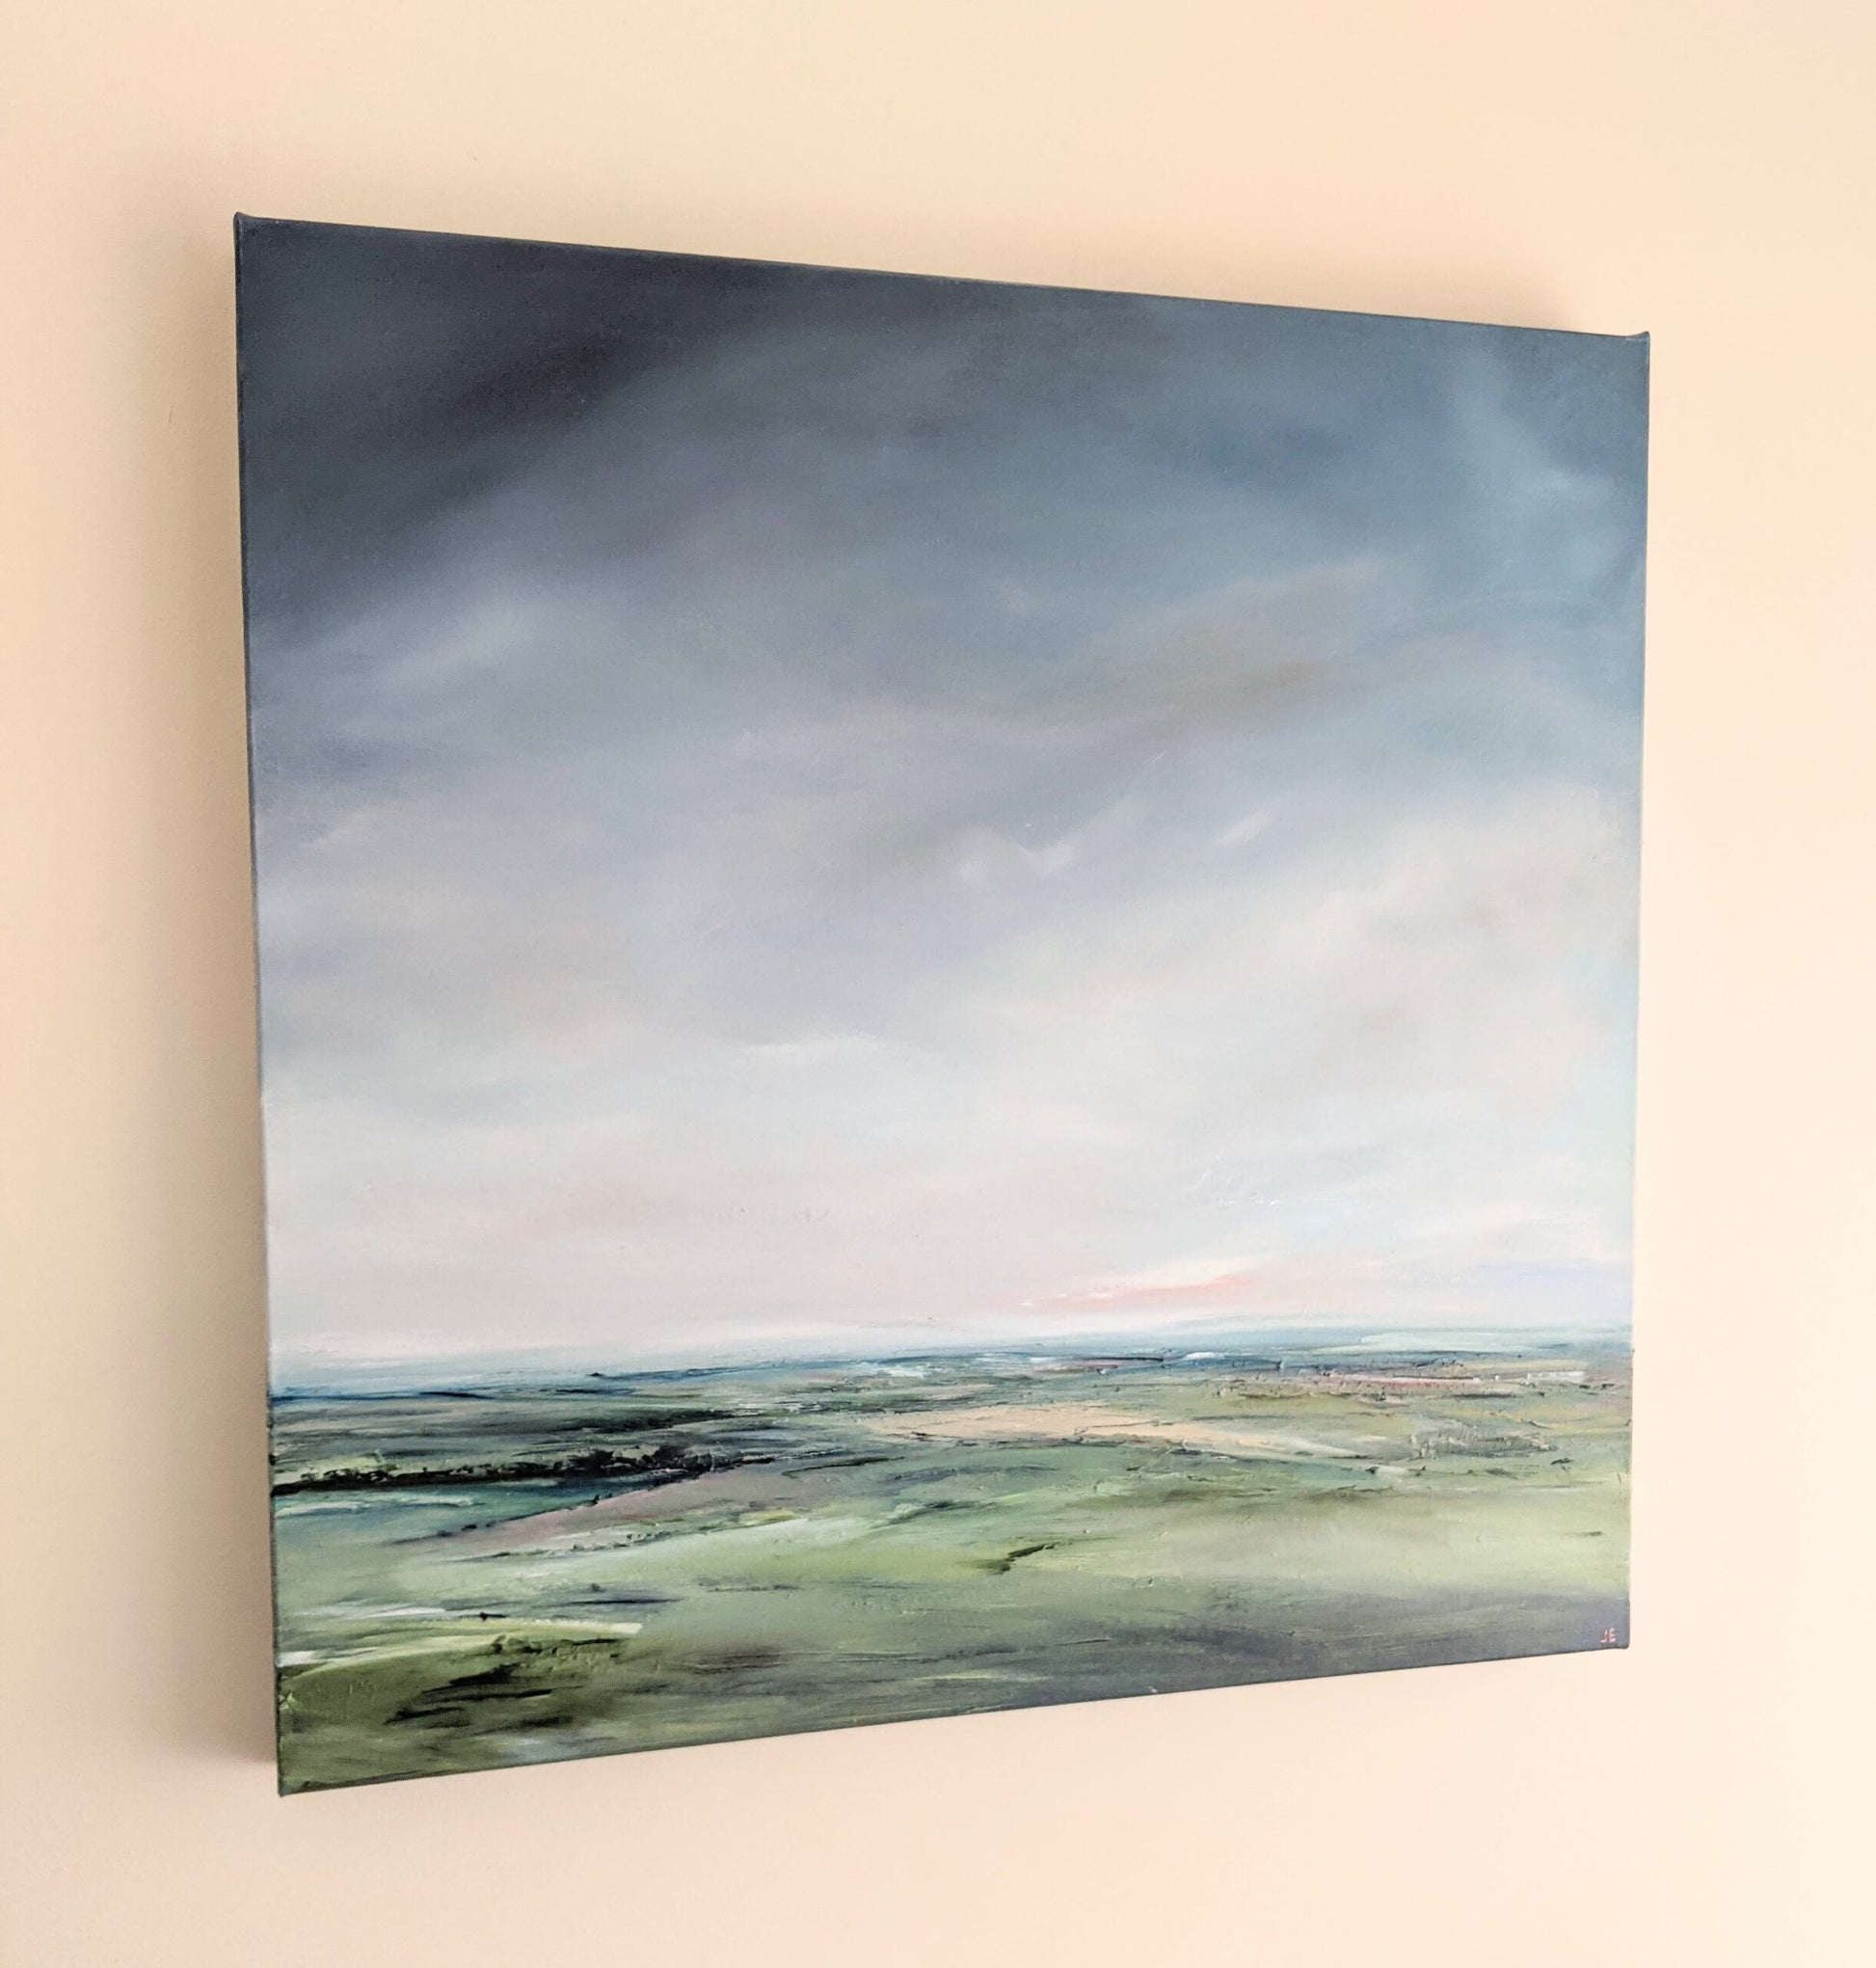 View fro Whiteleaf hill oil painting on the wall by Jo Earl